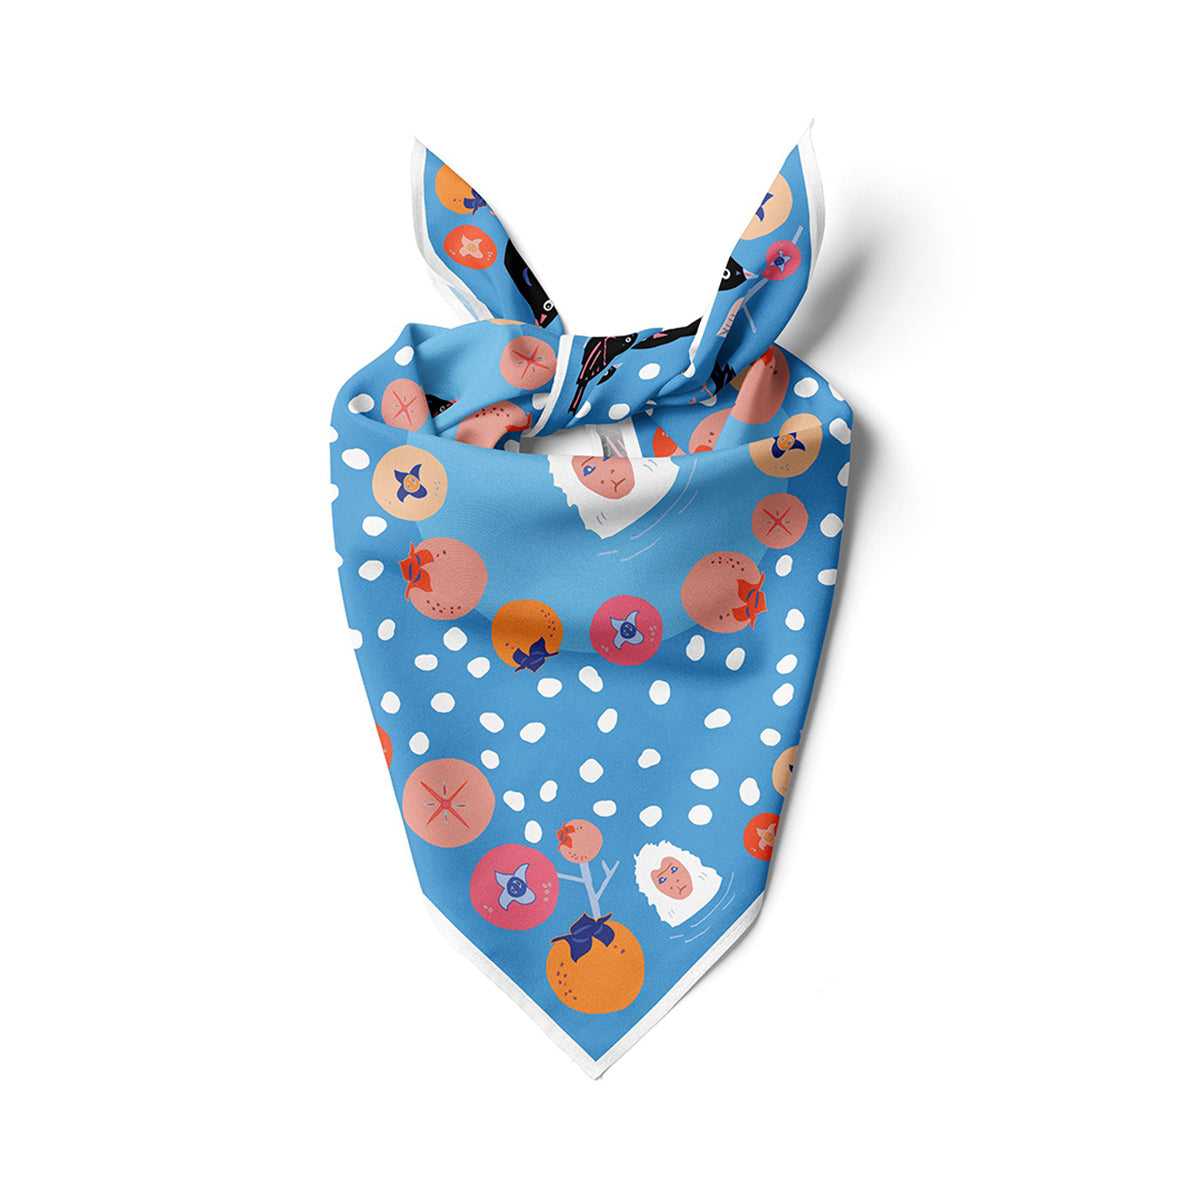 Blue tied cotton silk bandana with snow monkeys and permissions.